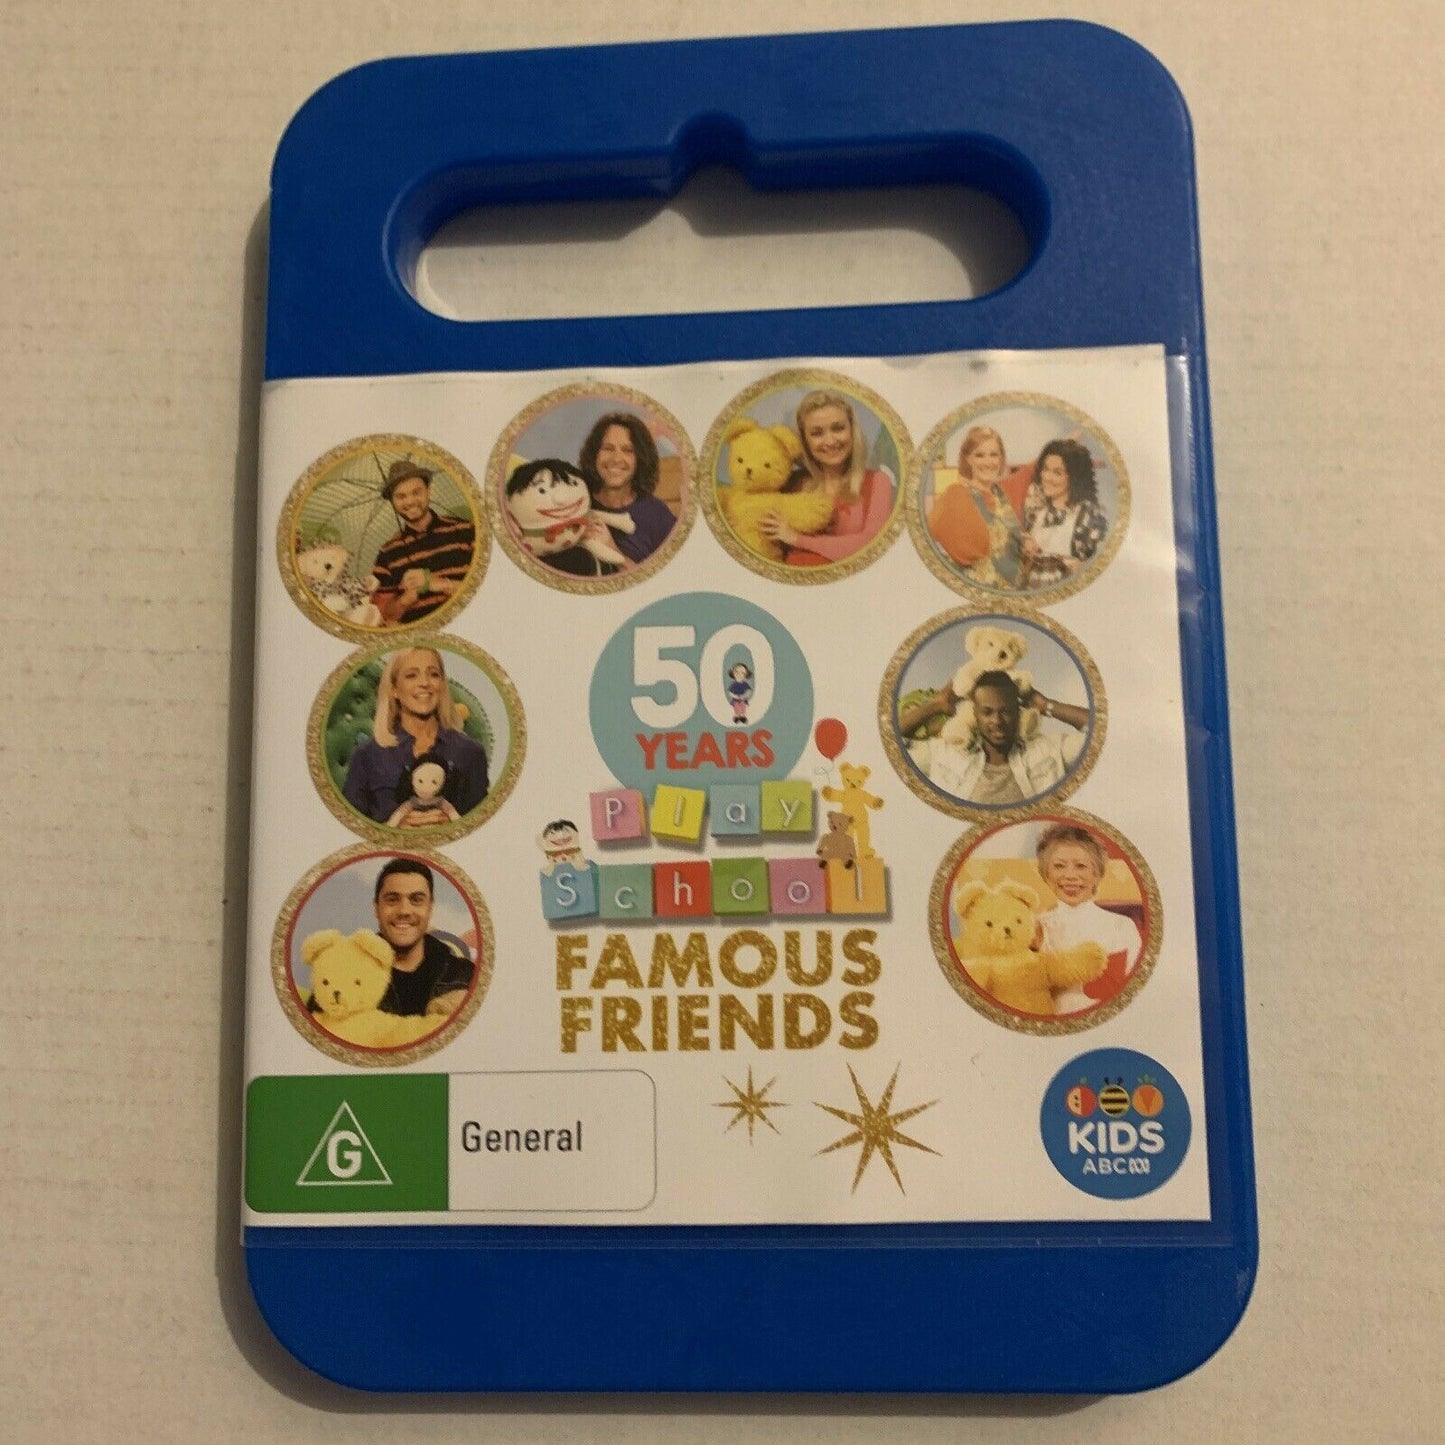 Play School - Famous Friends (DVD, 2016) Tim Minchin, Umbilical Brothers